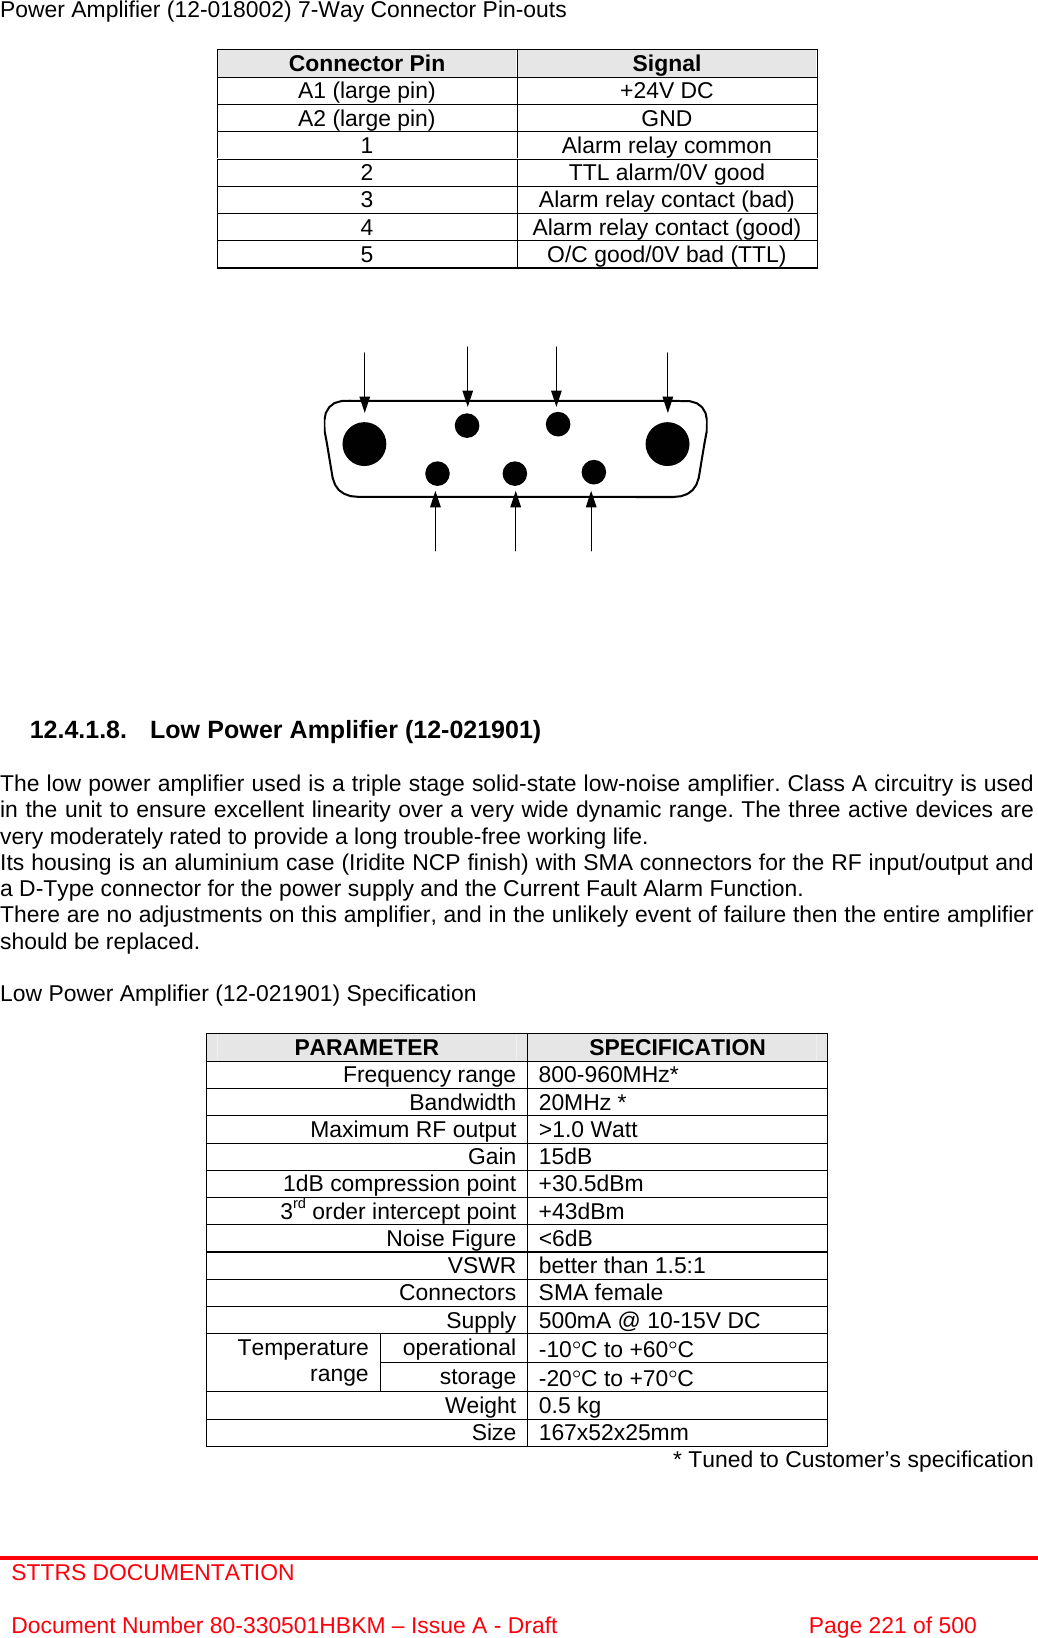 STTRS DOCUMENTATION  Document Number 80-330501HBKM – Issue A - Draft  Page 221 of 500   Power Amplifier (12-018002) 7-Way Connector Pin-outs  Connector Pin  Signal A1 (large pin)  +24V DC A2 (large pin)  GND 1  Alarm relay common 2  TTL alarm/0V good 3  Alarm relay contact (bad) 4  Alarm relay contact (good) 5  O/C good/0V bad (TTL)                  12.4.1.8.  Low Power Amplifier (12-021901)  The low power amplifier used is a triple stage solid-state low-noise amplifier. Class A circuitry is used in the unit to ensure excellent linearity over a very wide dynamic range. The three active devices are very moderately rated to provide a long trouble-free working life.  Its housing is an aluminium case (Iridite NCP finish) with SMA connectors for the RF input/output and a D-Type connector for the power supply and the Current Fault Alarm Function. There are no adjustments on this amplifier, and in the unlikely event of failure then the entire amplifier should be replaced.  Low Power Amplifier (12-021901) Specification  PARAMETER  SPECIFICATION Frequency range 800-960MHz* Bandwidth 20MHz * Maximum RF output &gt;1.0 Watt Gain 15dB 1dB compression point +30.5dBm 3rd order intercept point +43dBm Noise Figure &lt;6dB VSWR better than 1.5:1 Connectors SMA female Supply 500mA @ 10-15V DC operational -10°C to +60°C Temperature range  storage -20°C to +70°C Weight 0.5 kg Size 167x52x25mm * Tuned to Customer’s specification 